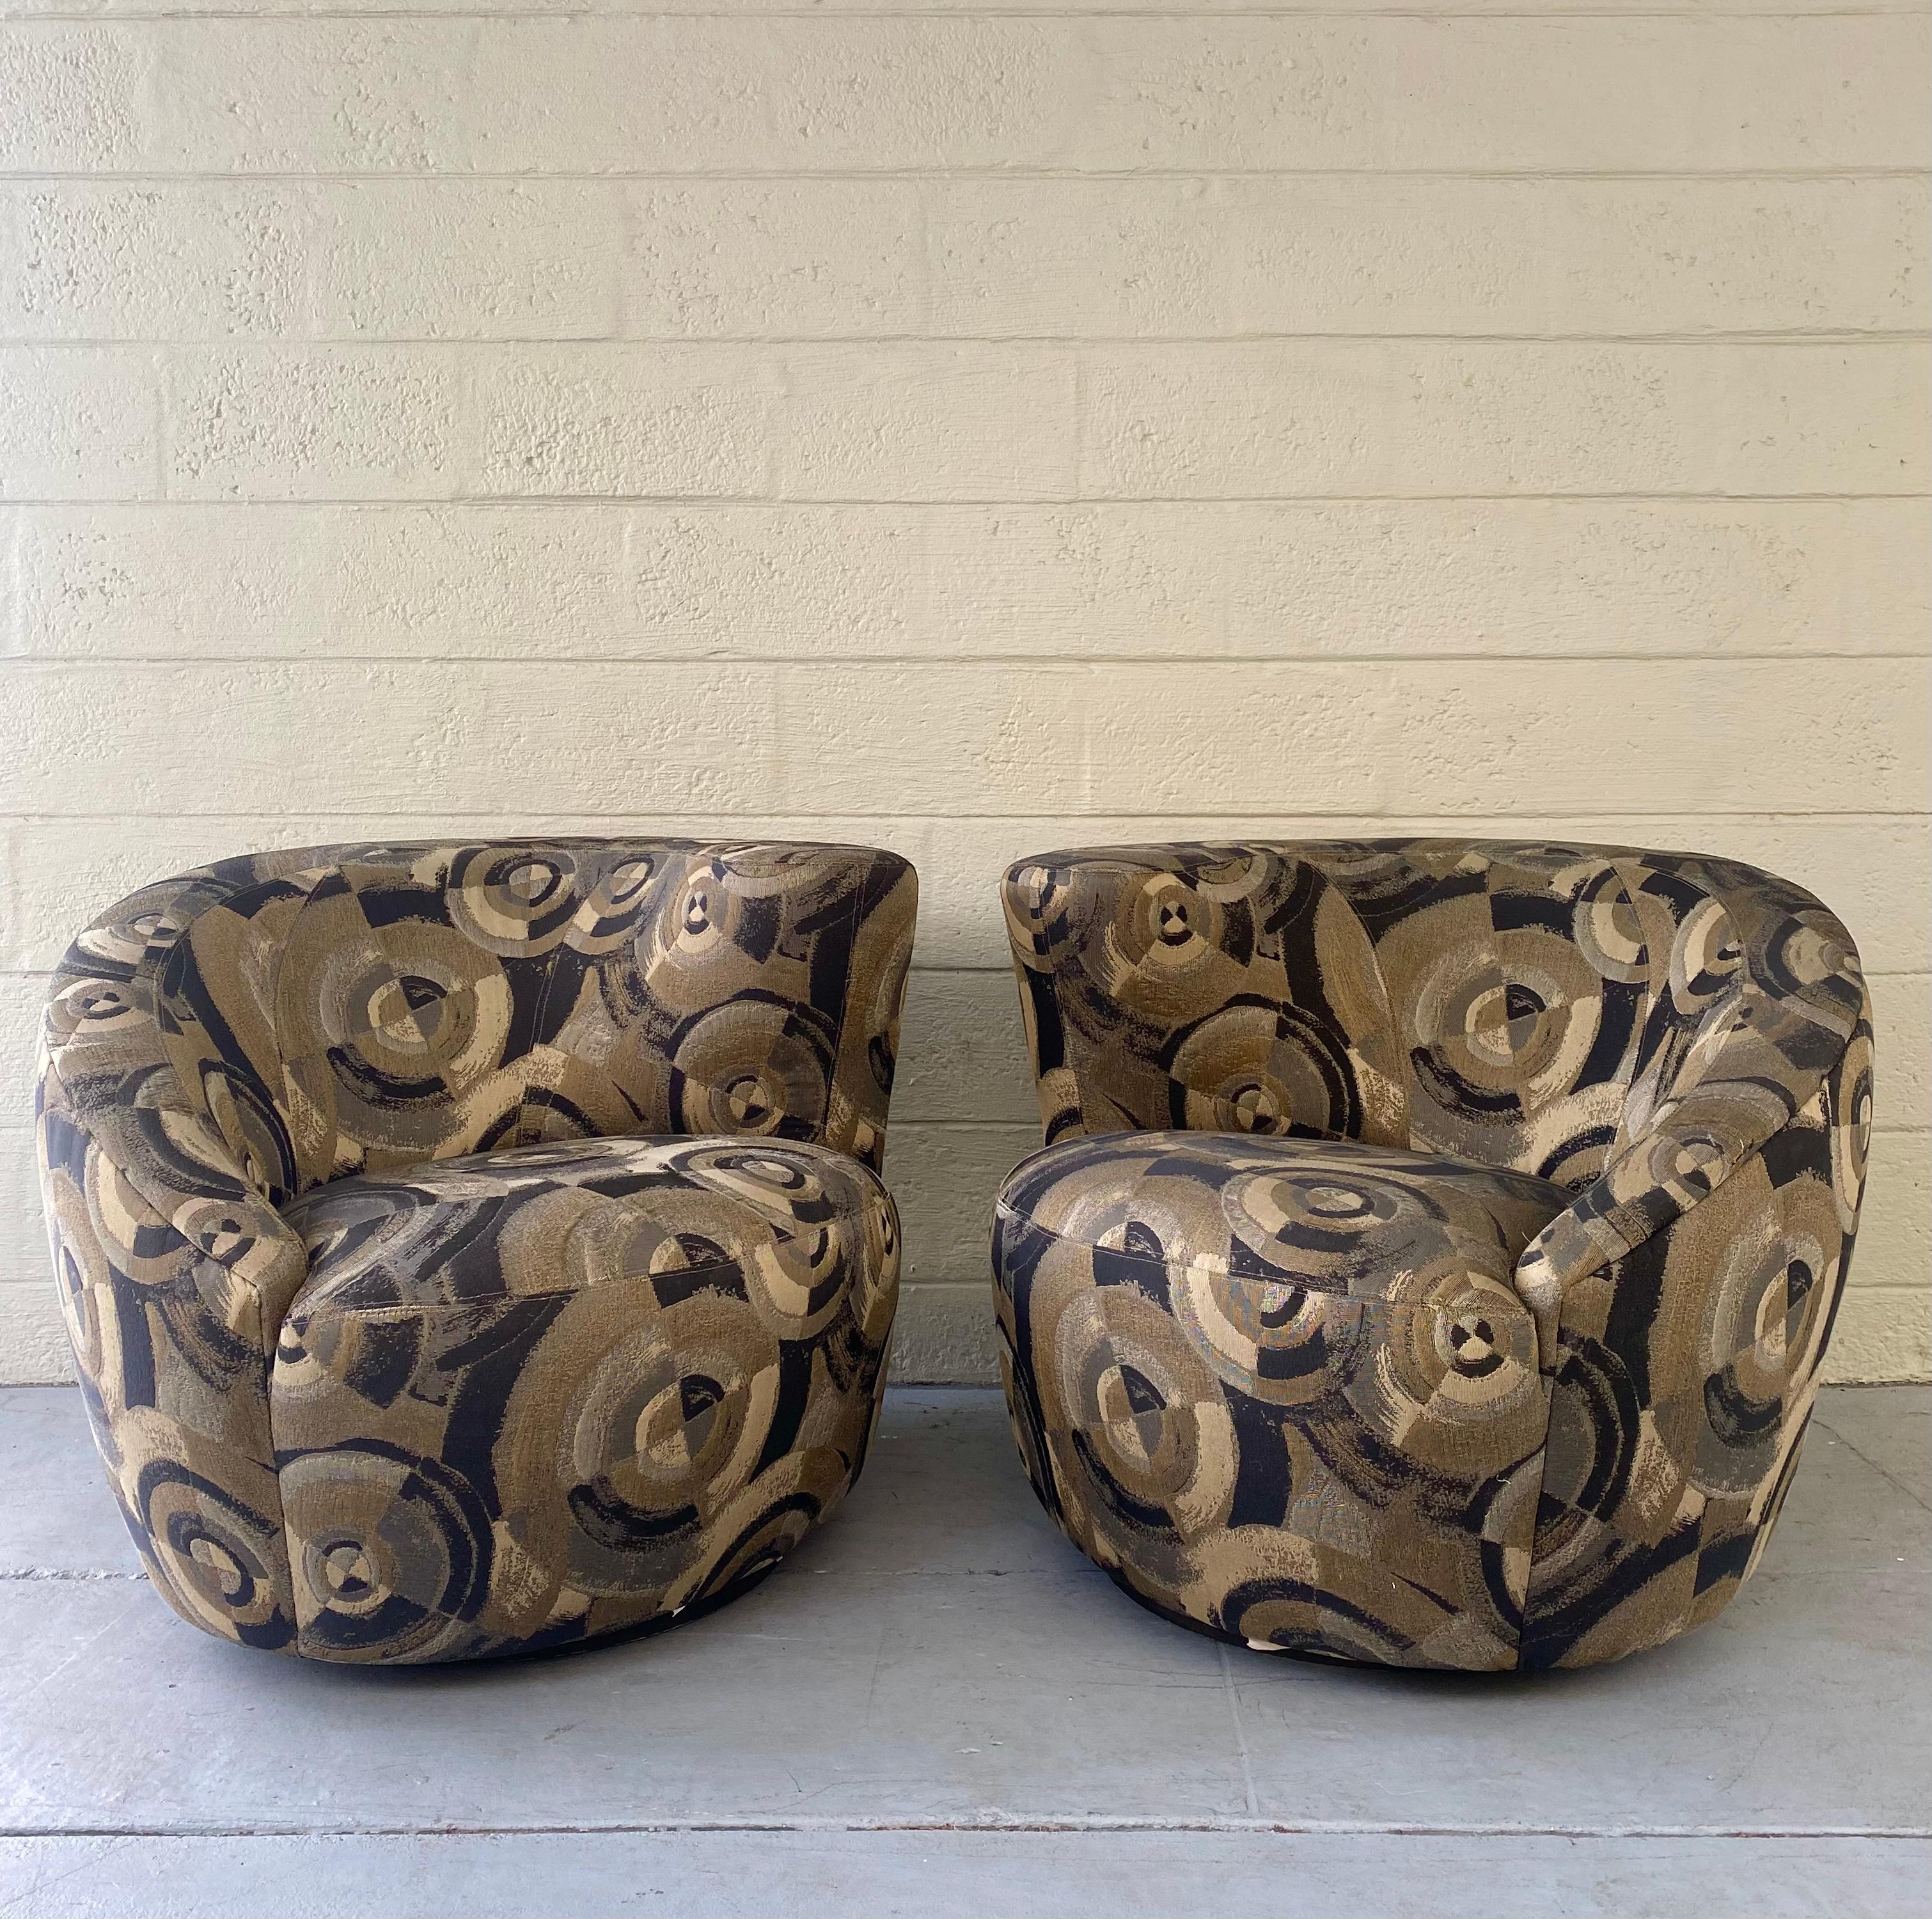 Post-Modern 1980s XL Nautilus Abstract Weiman Sculptural Swivel Chairs, Set of 2 For Sale